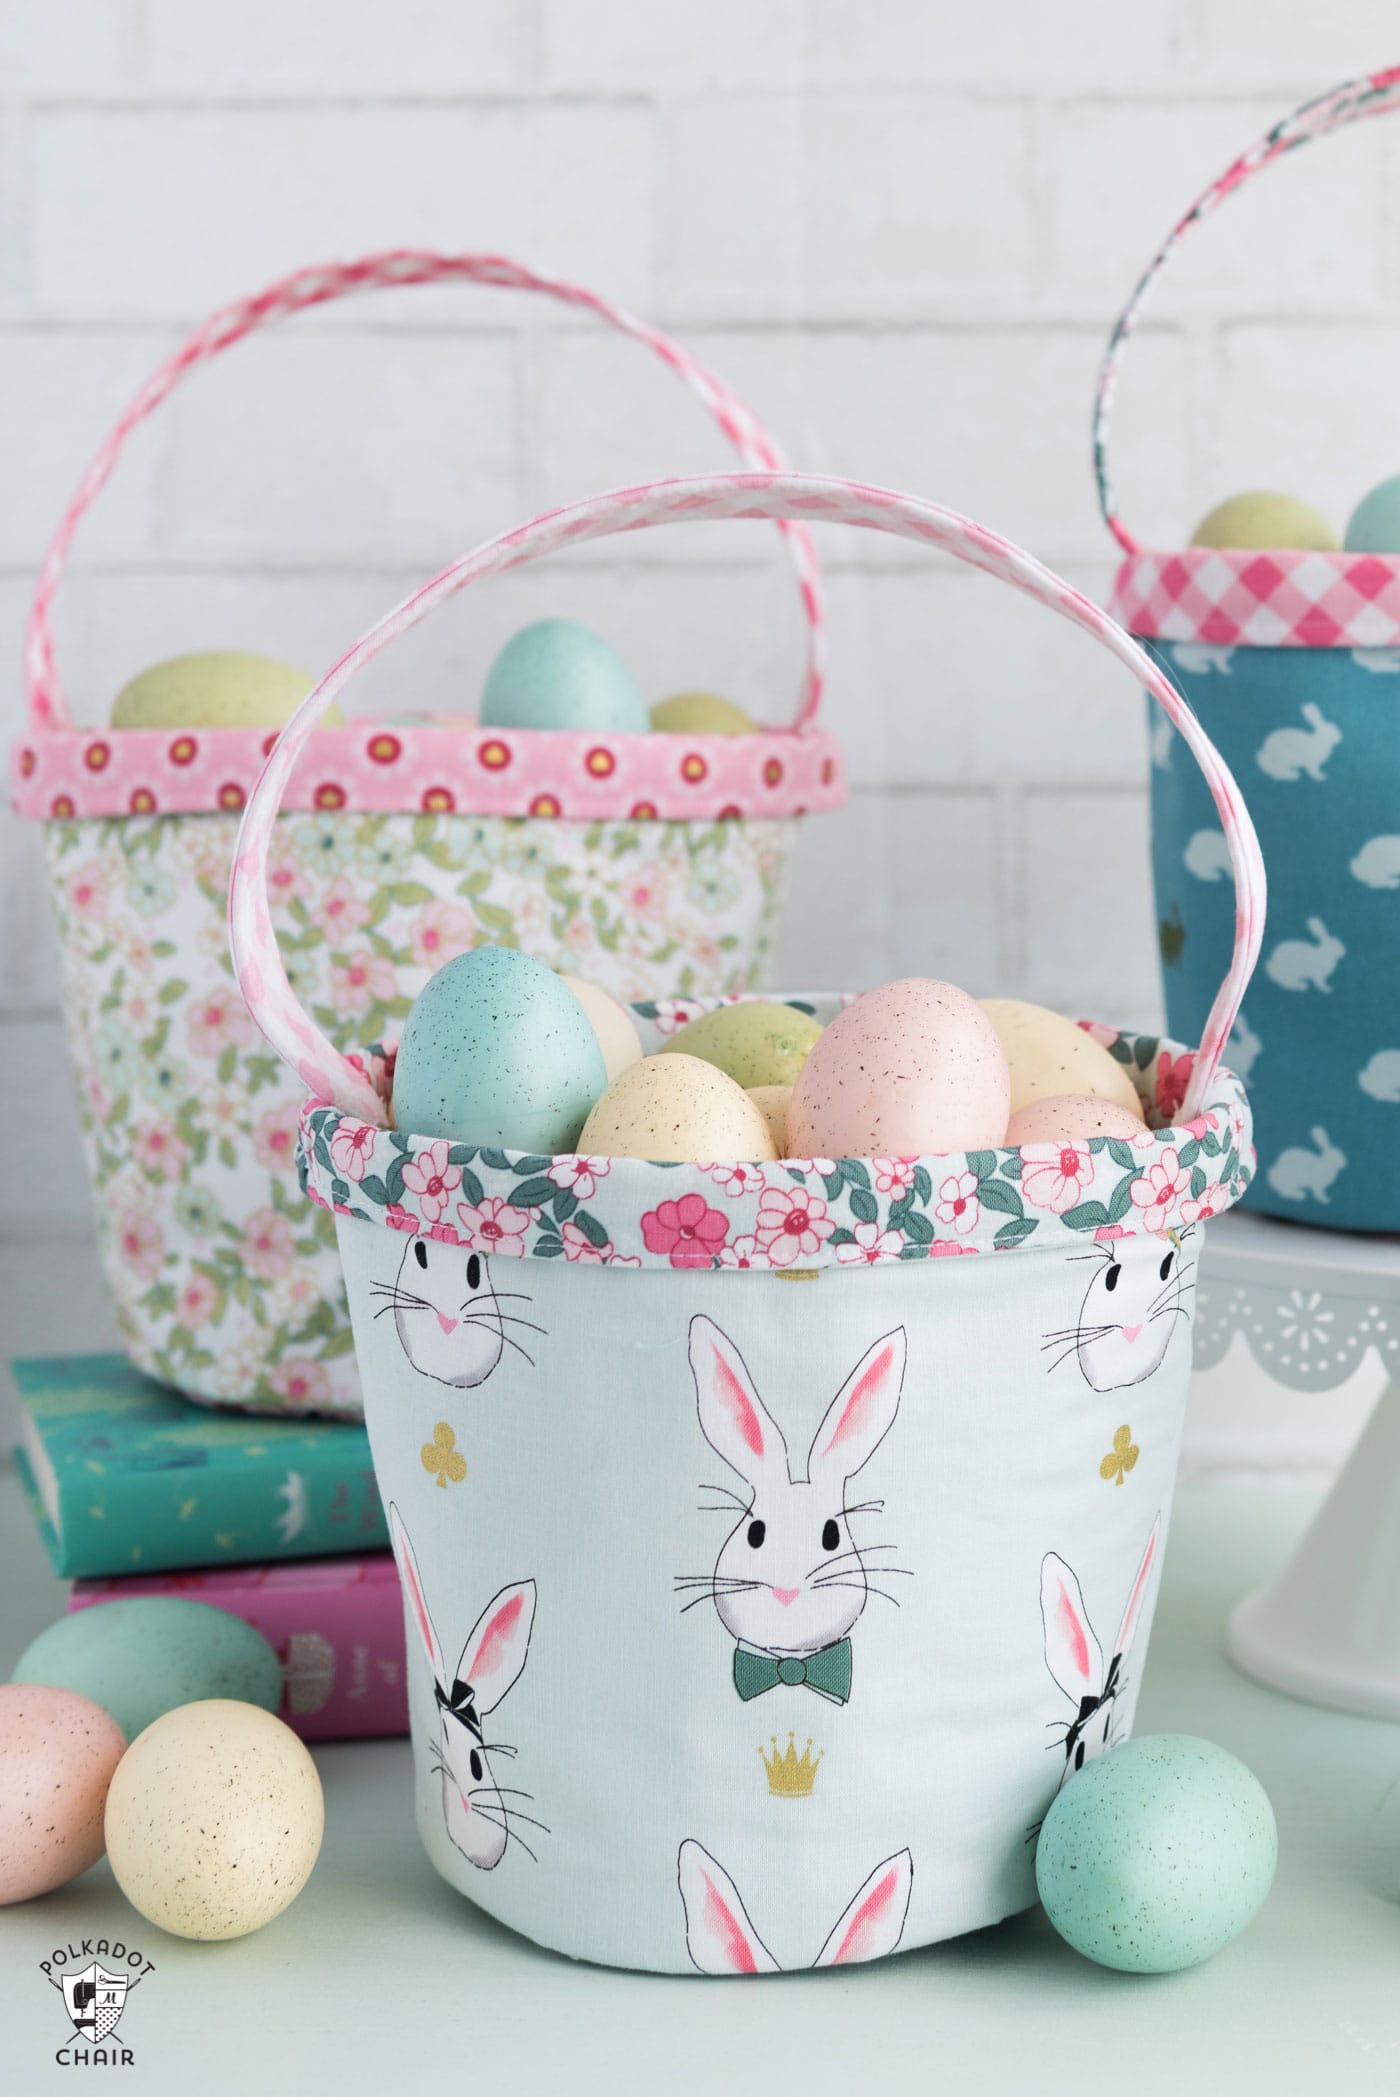 Easter Basket Sewing Pattern - The Polka Dot Chair